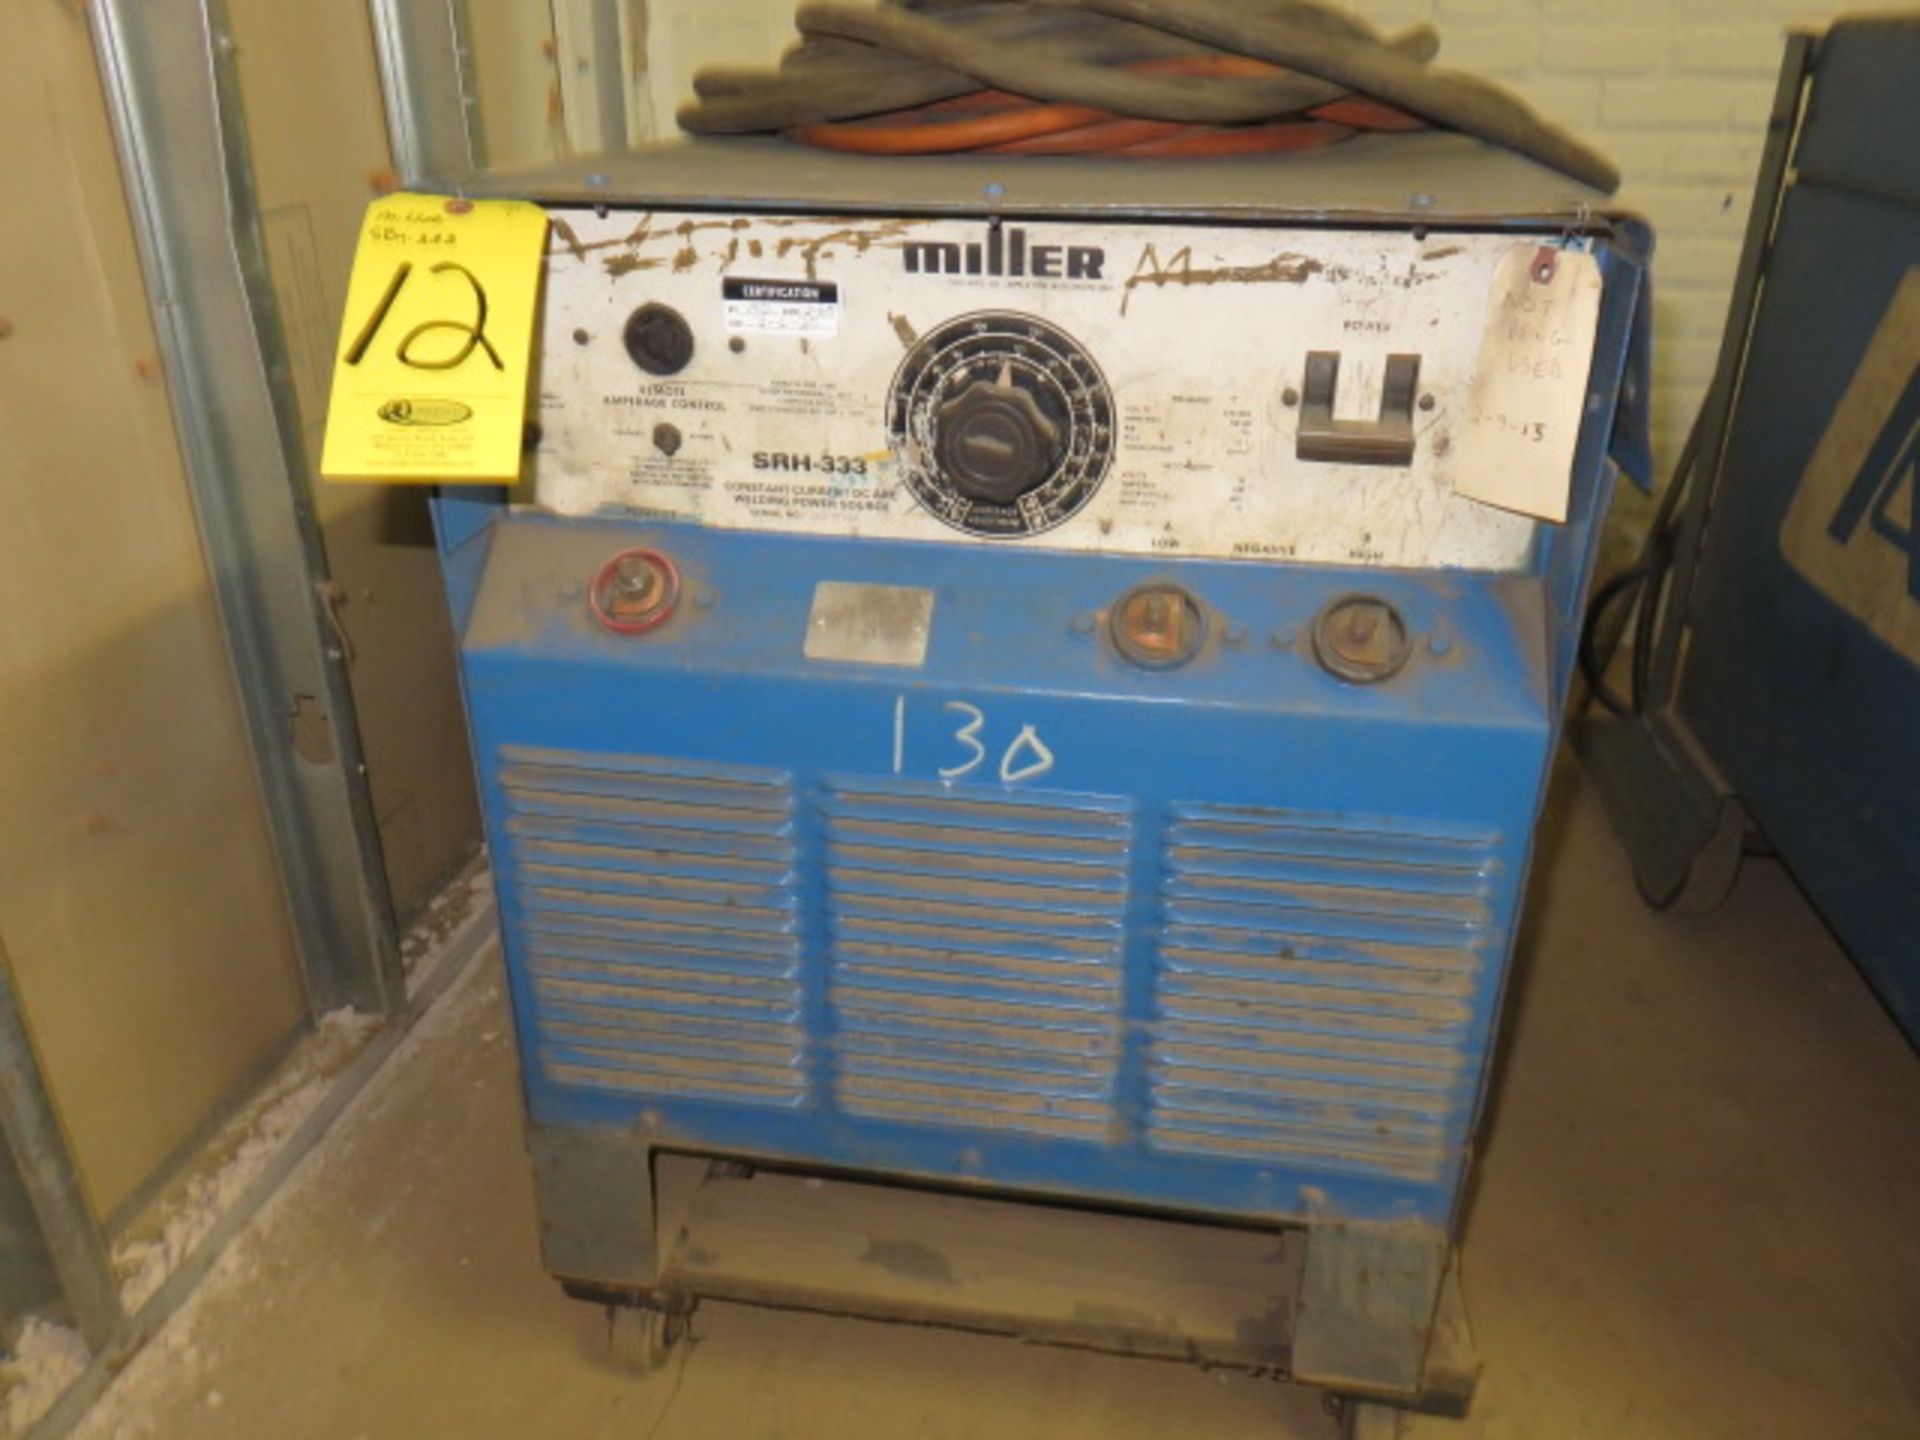 MILLER SRM-333 CC DC ARC POWER SUPPLY (TAKEN OUT OF ACTIVE SERVICE-WORKING CONDITION IS UNKNOWN)